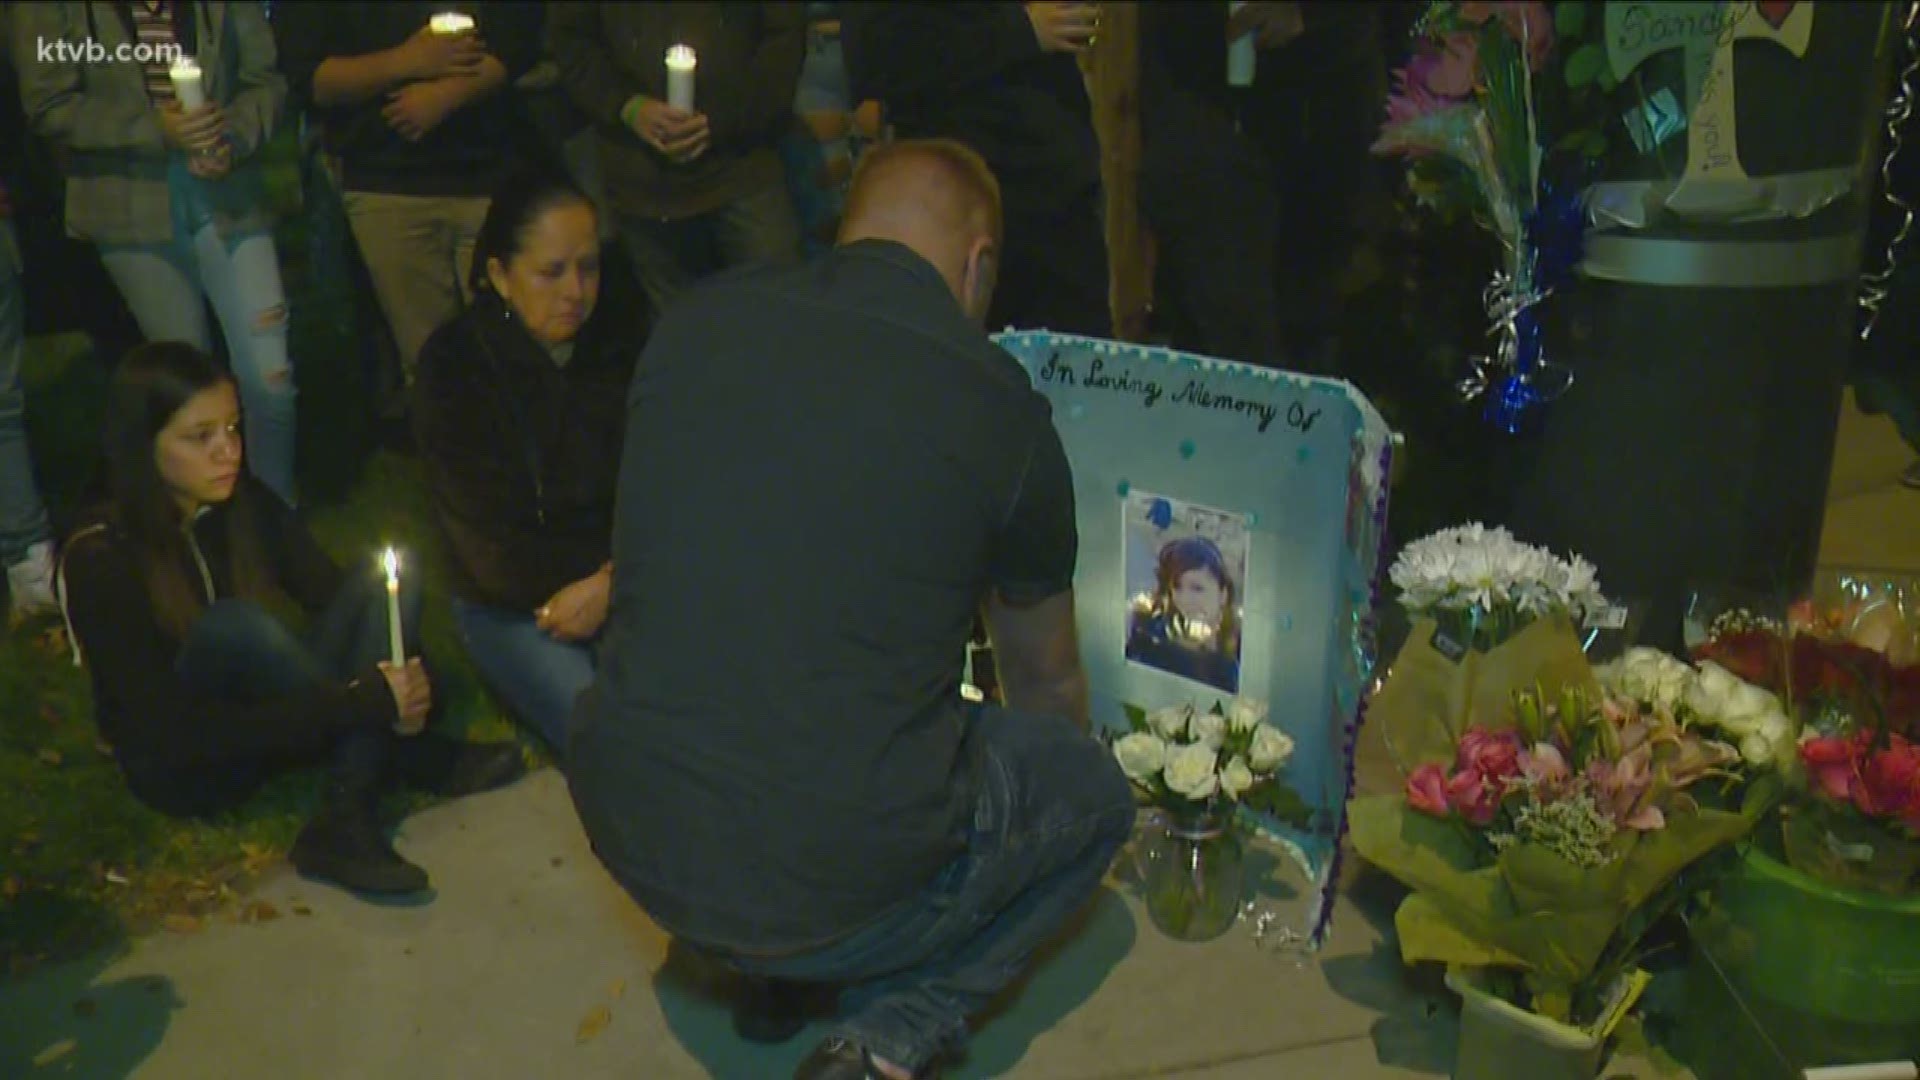 Family, friends, and people touched by her story gathered Friday, October 19, 2018, at the corner of Ustick and Eagle roads in Meridian, Idaho, in memory of Sandy Hernandez, who was hit and killed by a truck earlier in the week.